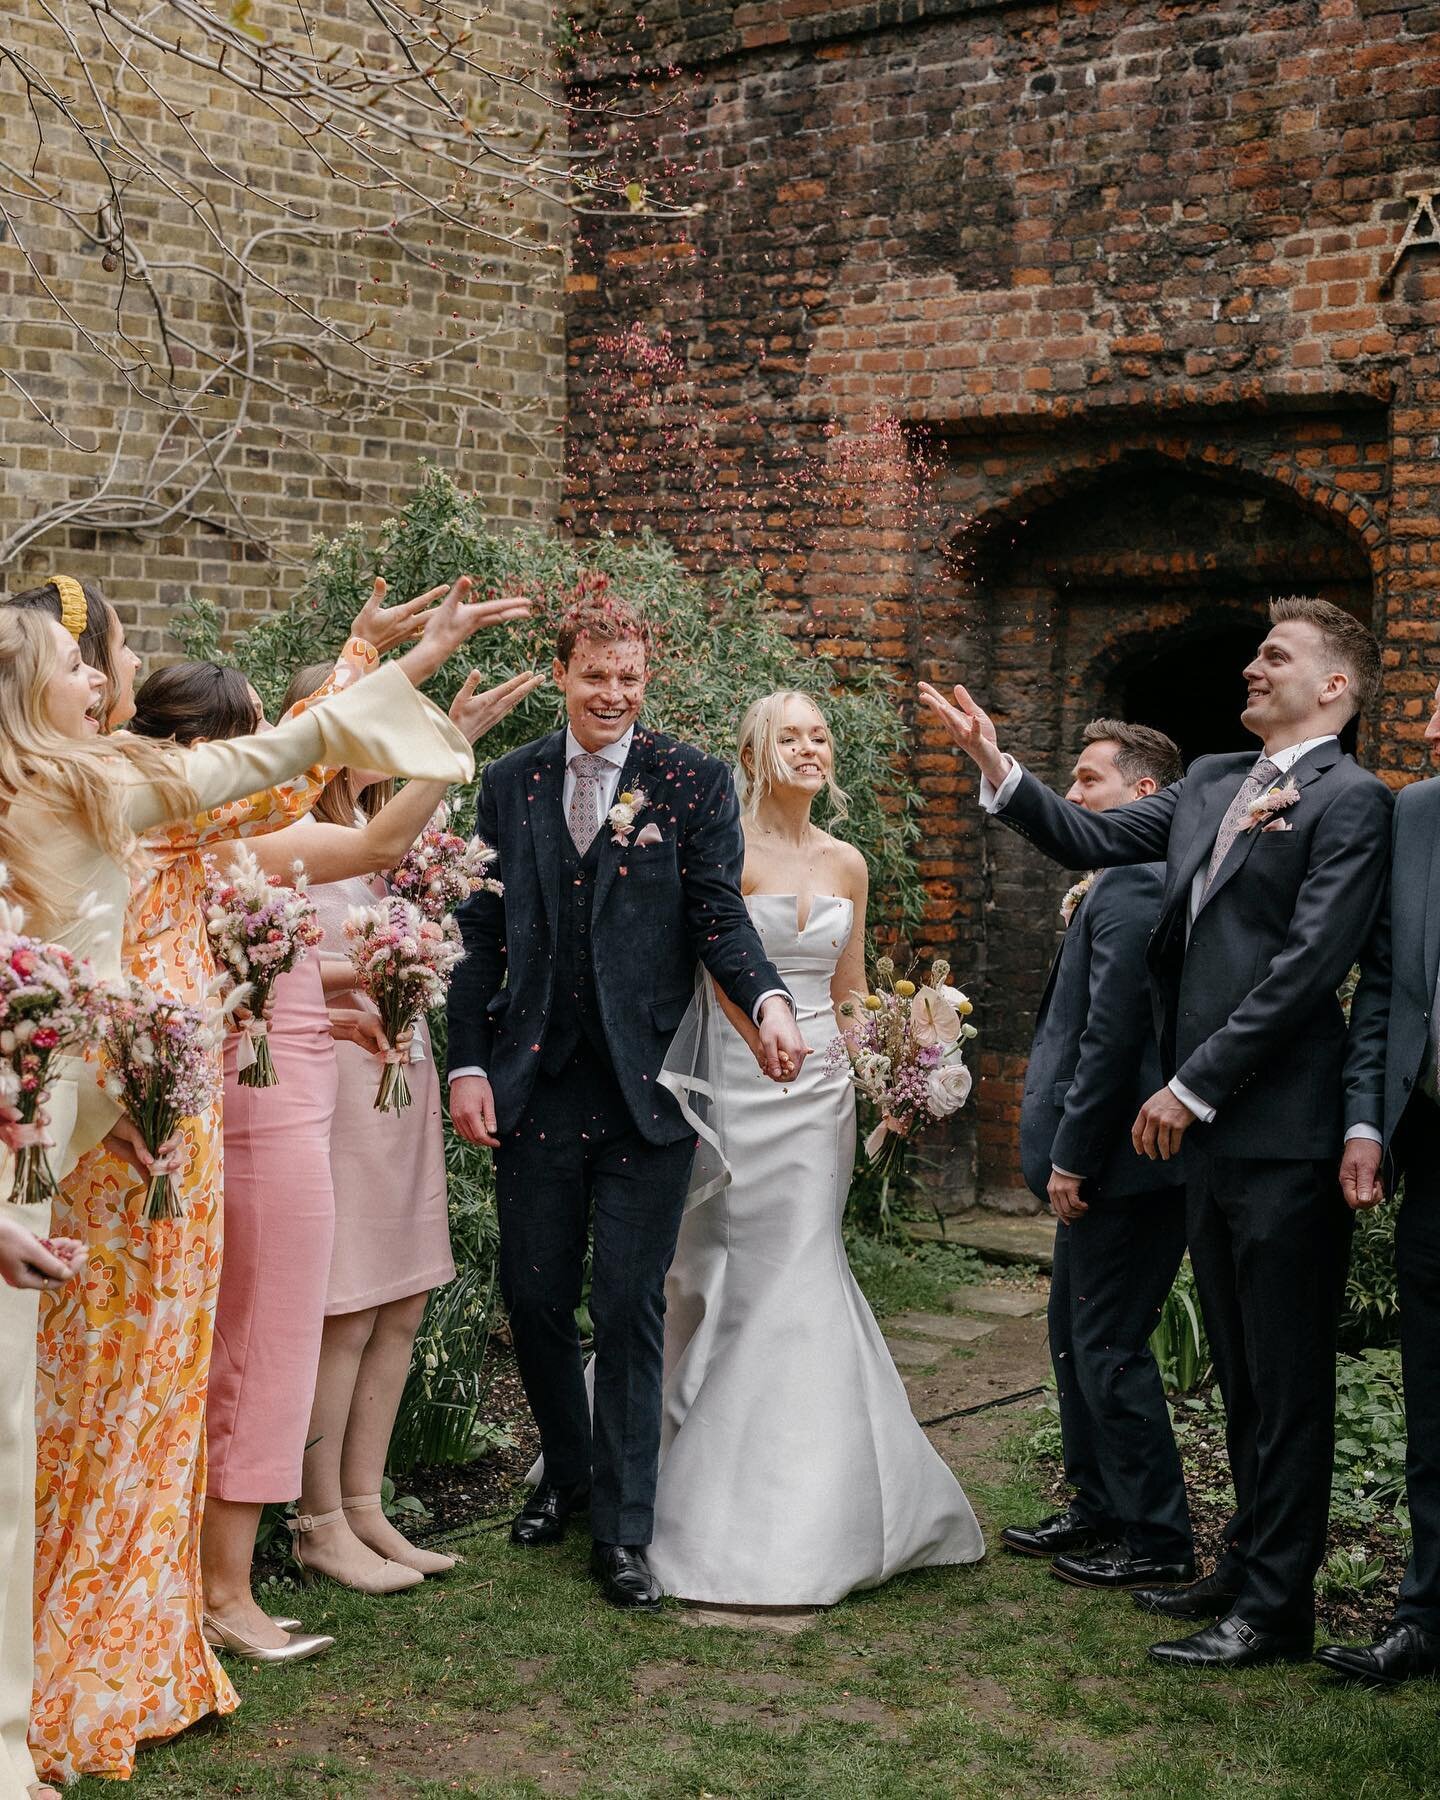 The very best day with B+H in London this weekend.

Venue @thecharterhouse_events @cafedumarche
Florist @chobhamflowers 
MUA @jazcrush.artistry
Dress @surreysewingstudio
Music @thetalentband